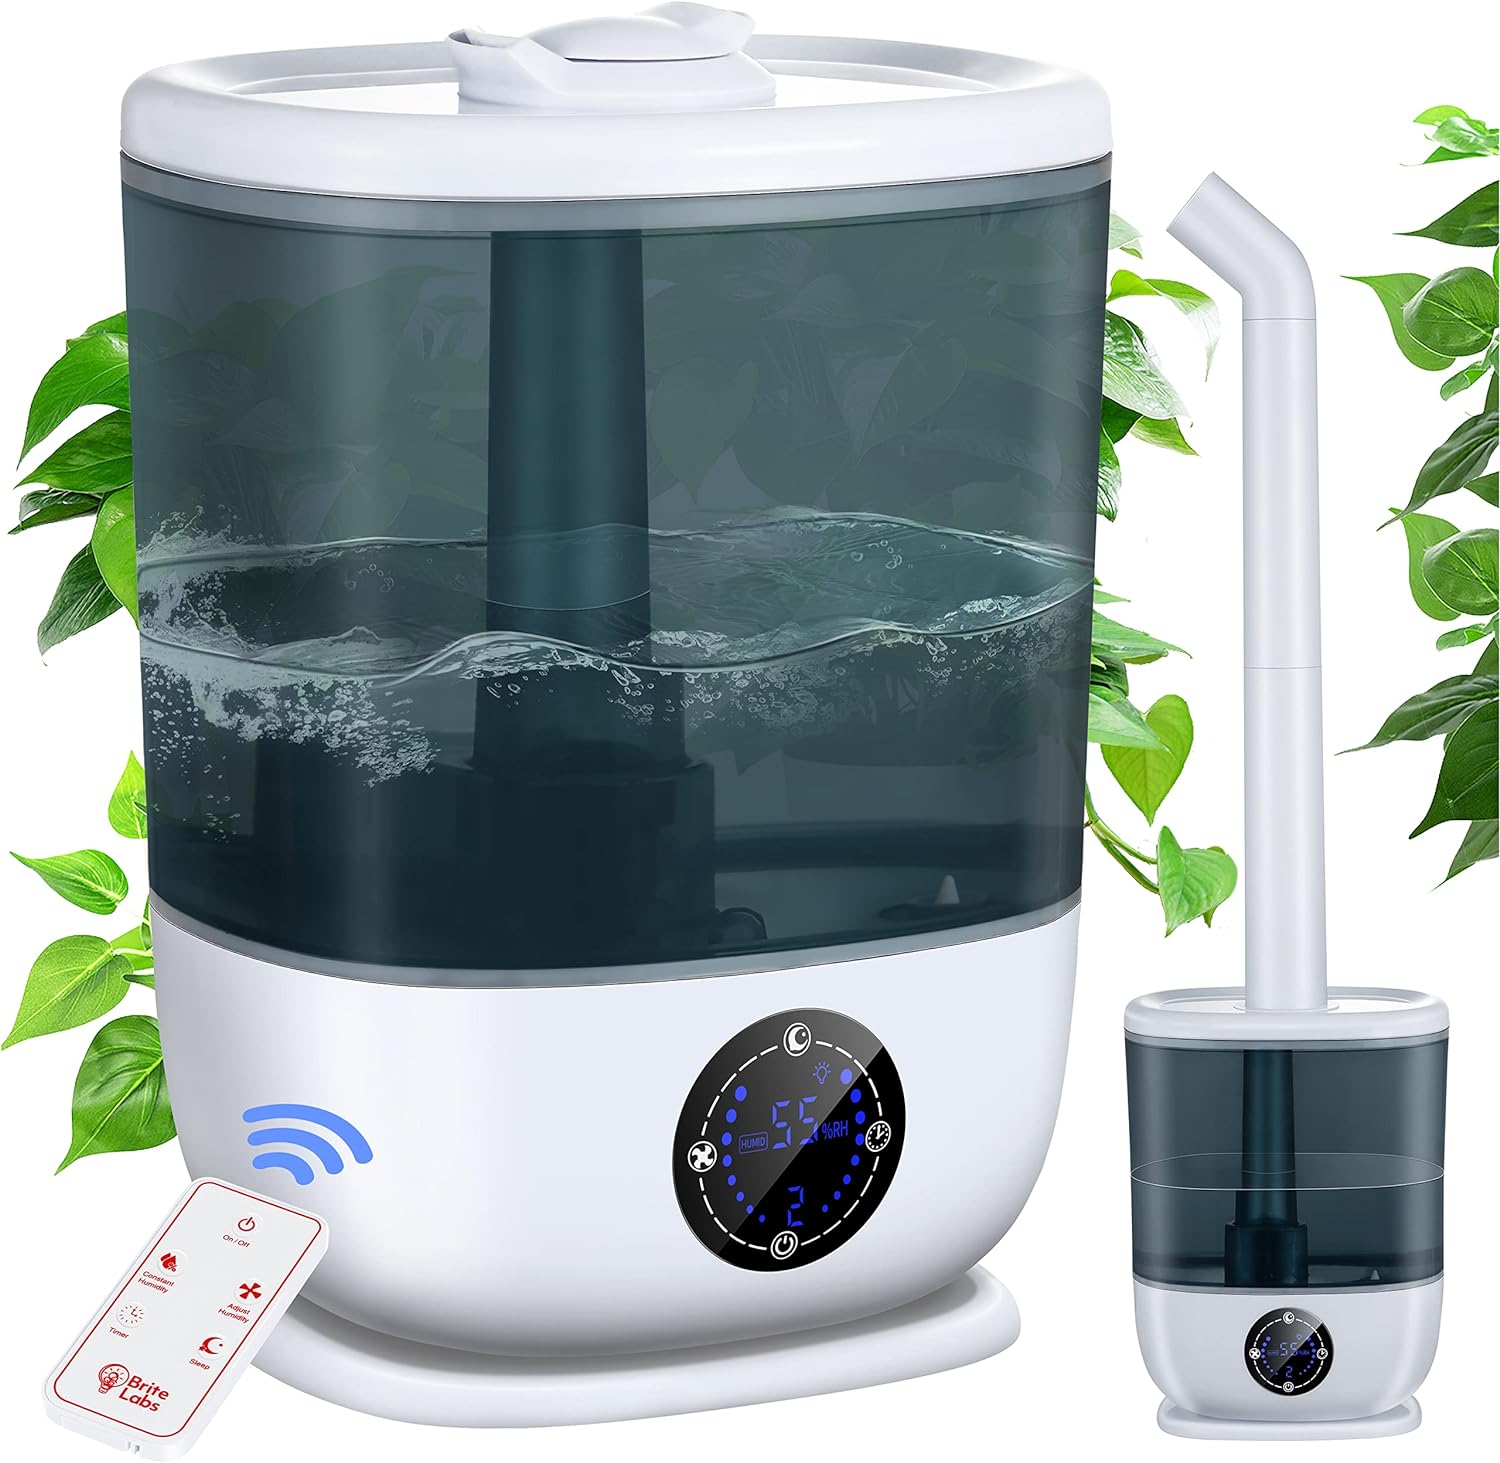 Plant Humidifier Indoor - 6L Top Fill Humidifier for Plants Growing Indoors - Quiet Cool Mist Humidifiers for Kids, Nursery, Bedroom - Large Room Ultrasonic Vaporizer Humidifiers for Home